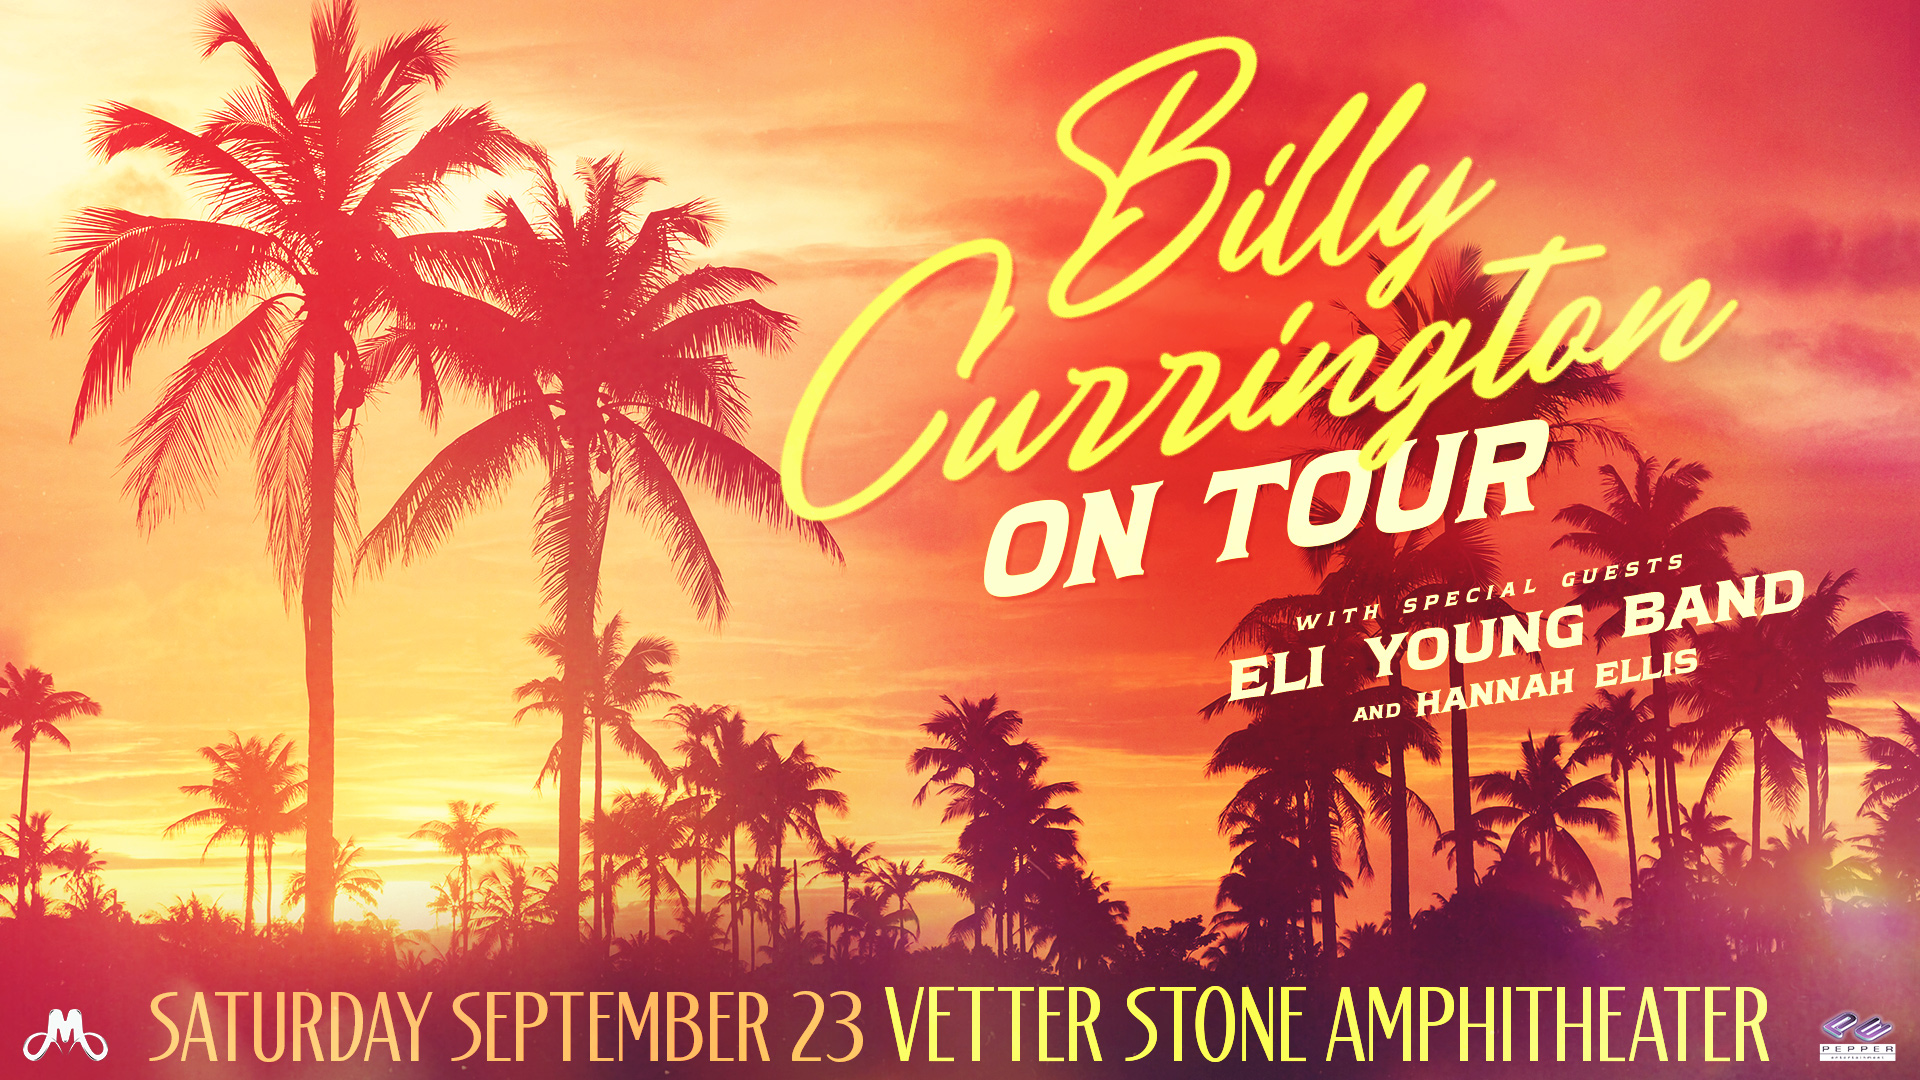 <h1 class="tribe-events-single-event-title">Billy Currington @ Vetter Stone Amphitheater</h1>